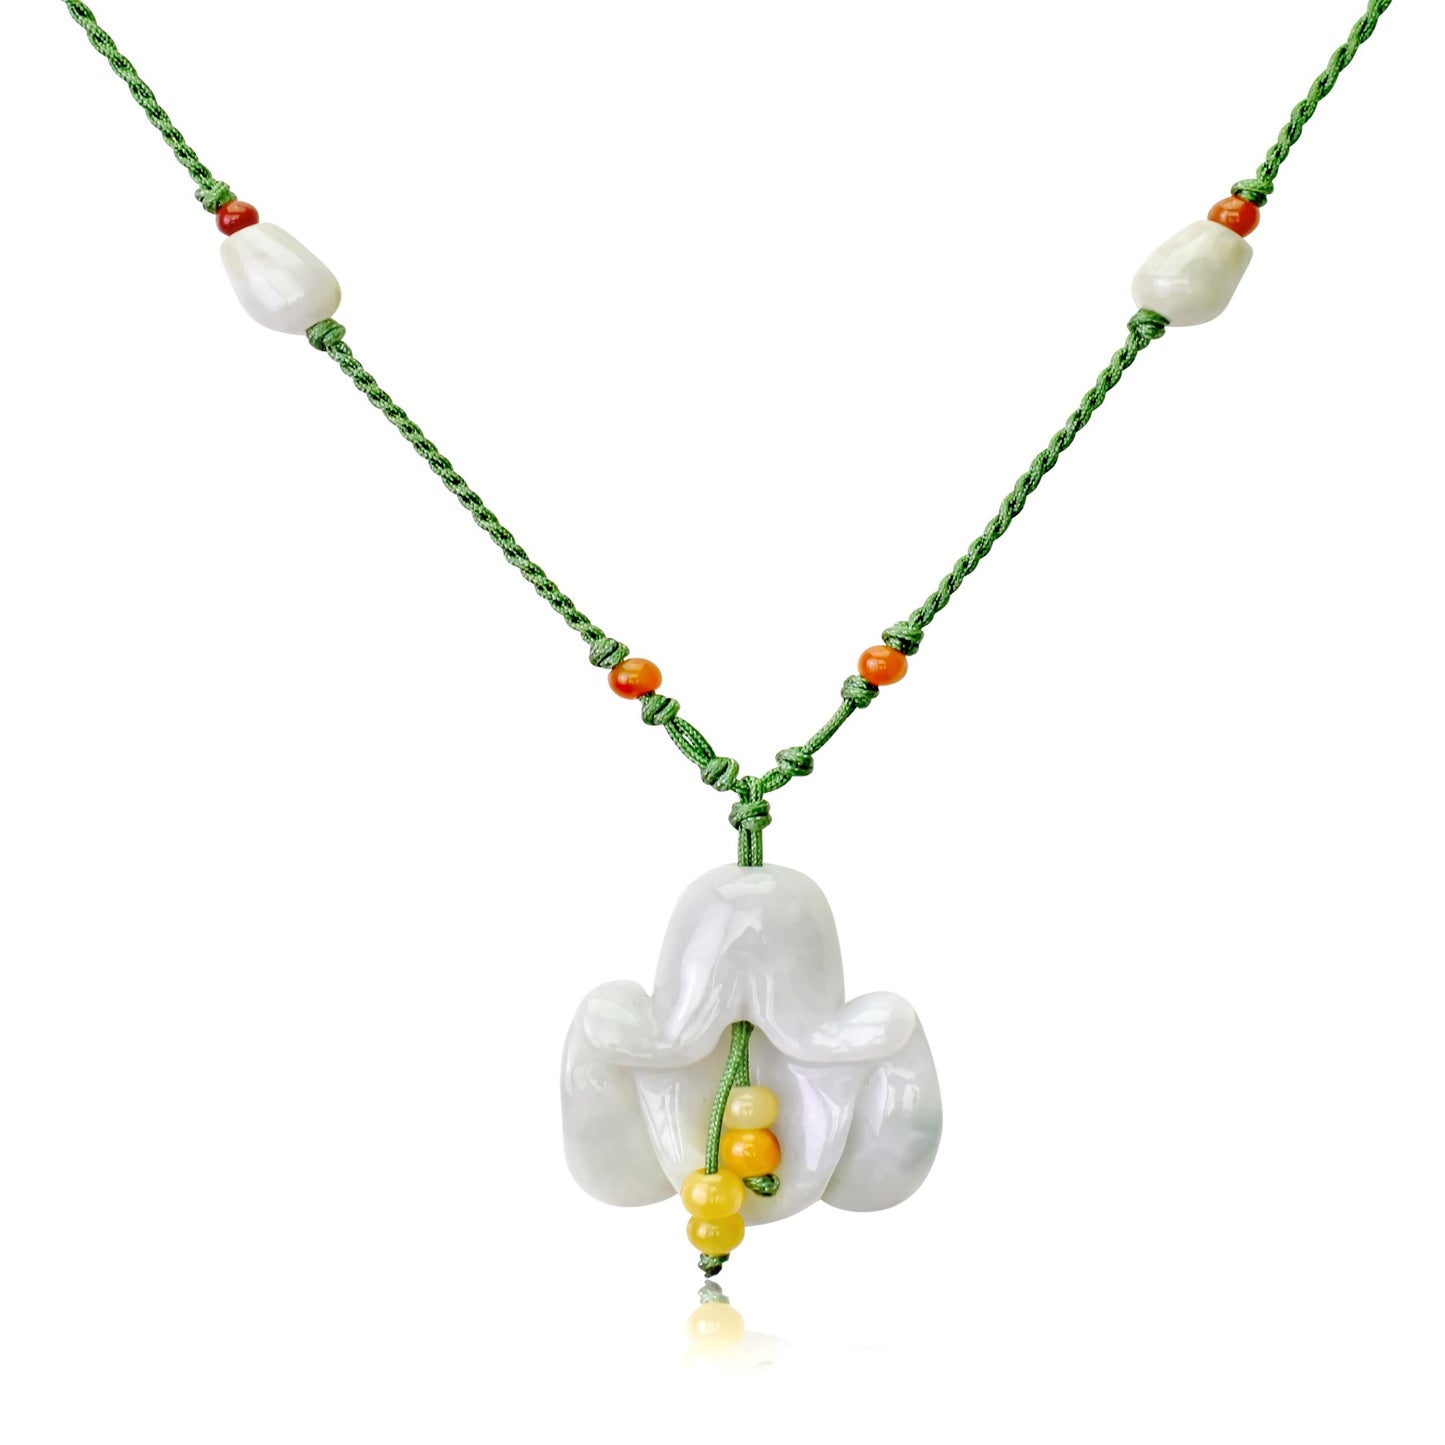 Look Radiant with a Bellflower Handmade Jade Necklace